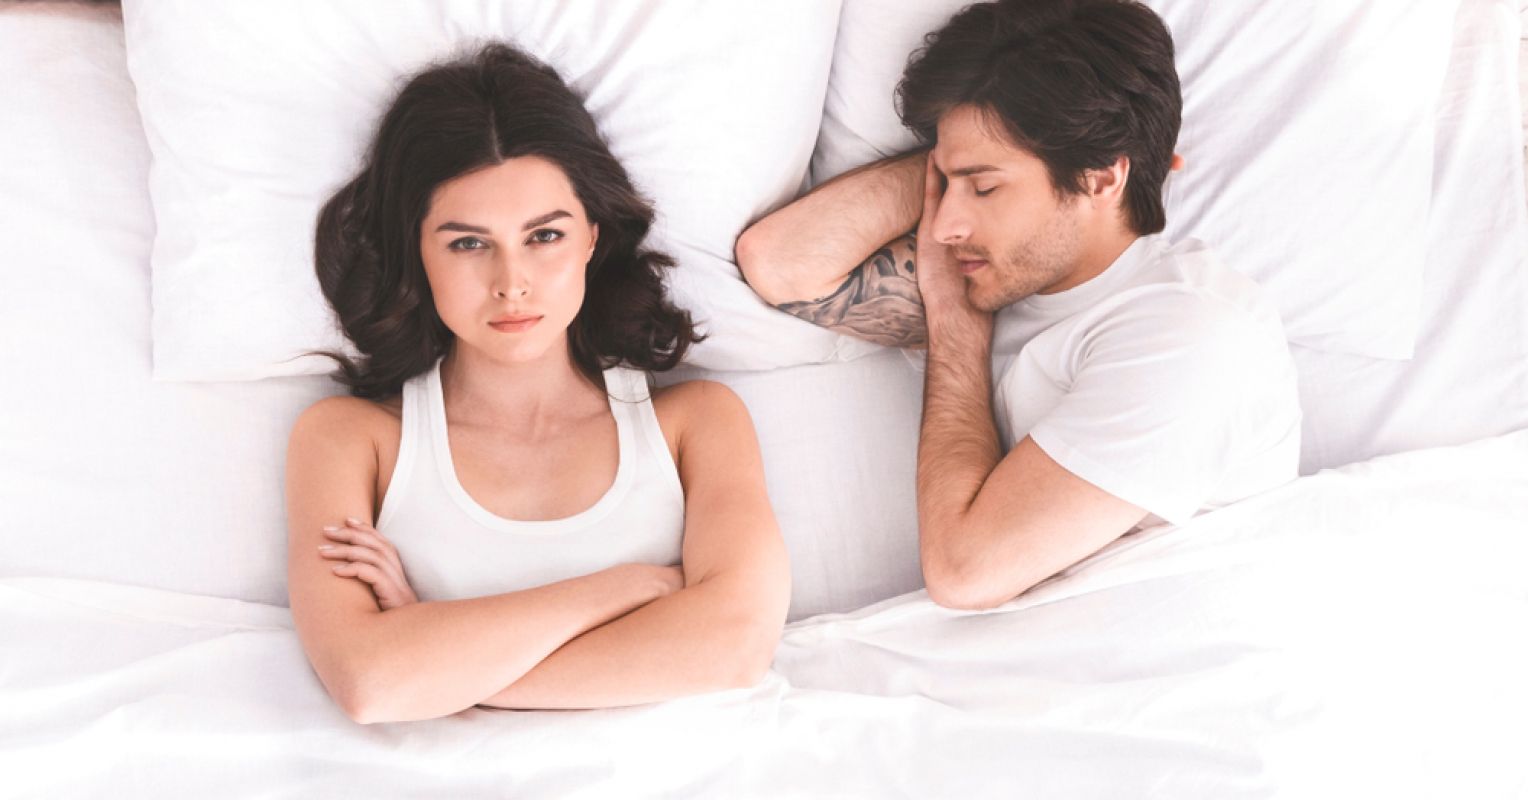 The Real Reason Why Women Have Fewer Orgasms Than Men Psychology Today